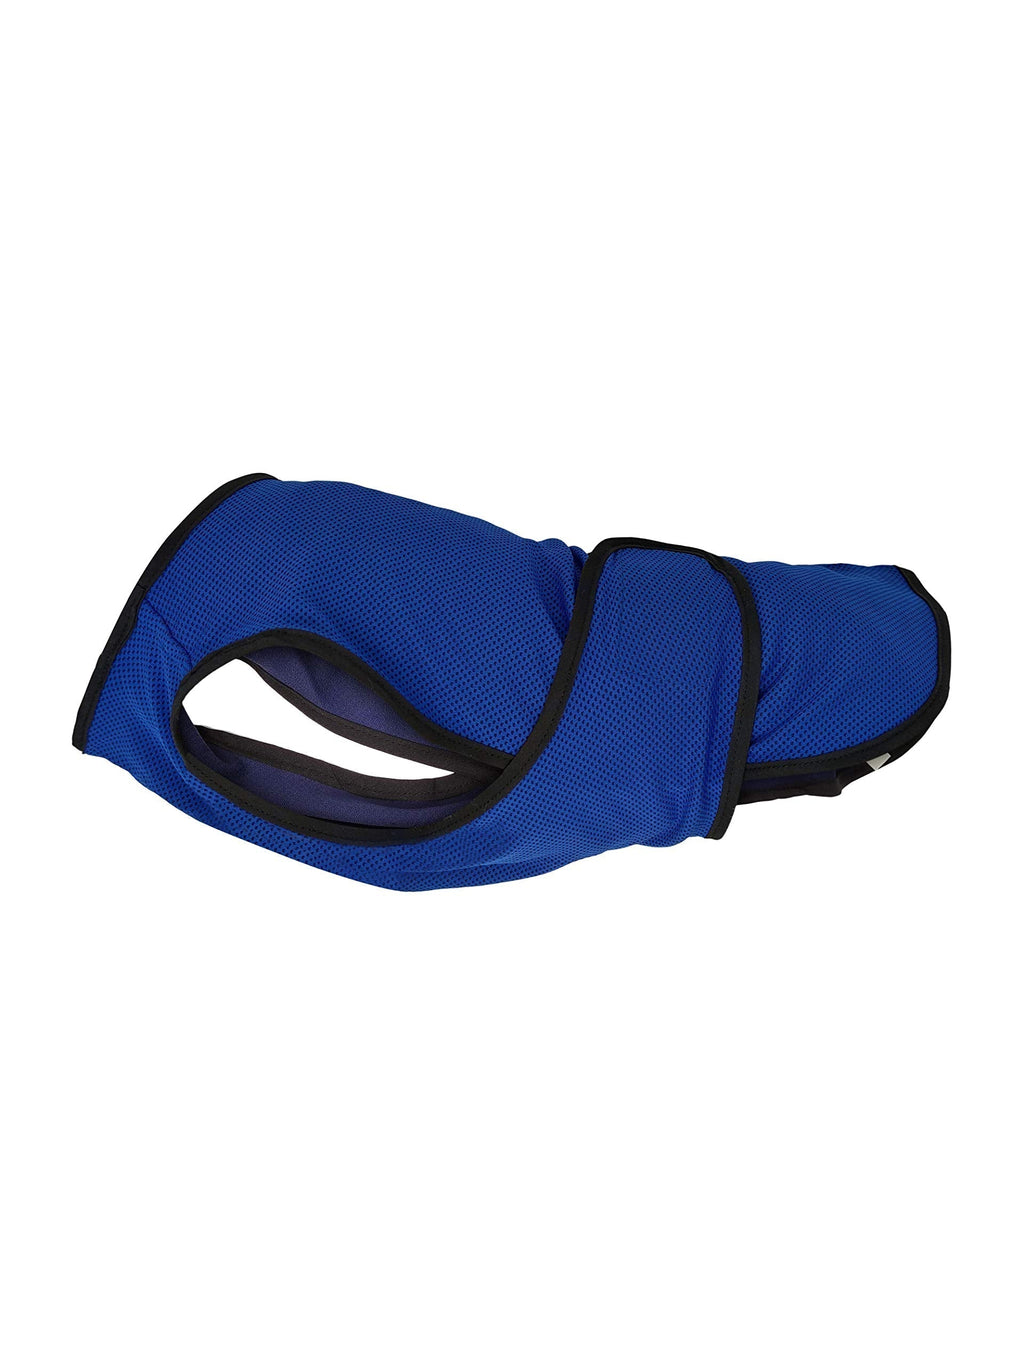 Lautus Pets Small Dog Cooling Vest - Lightweight Dog Cooling Jacket for small dogs. (e.g. Maltese, Pomeranian) S - Small 35cm Blue - PawsPlanet Australia